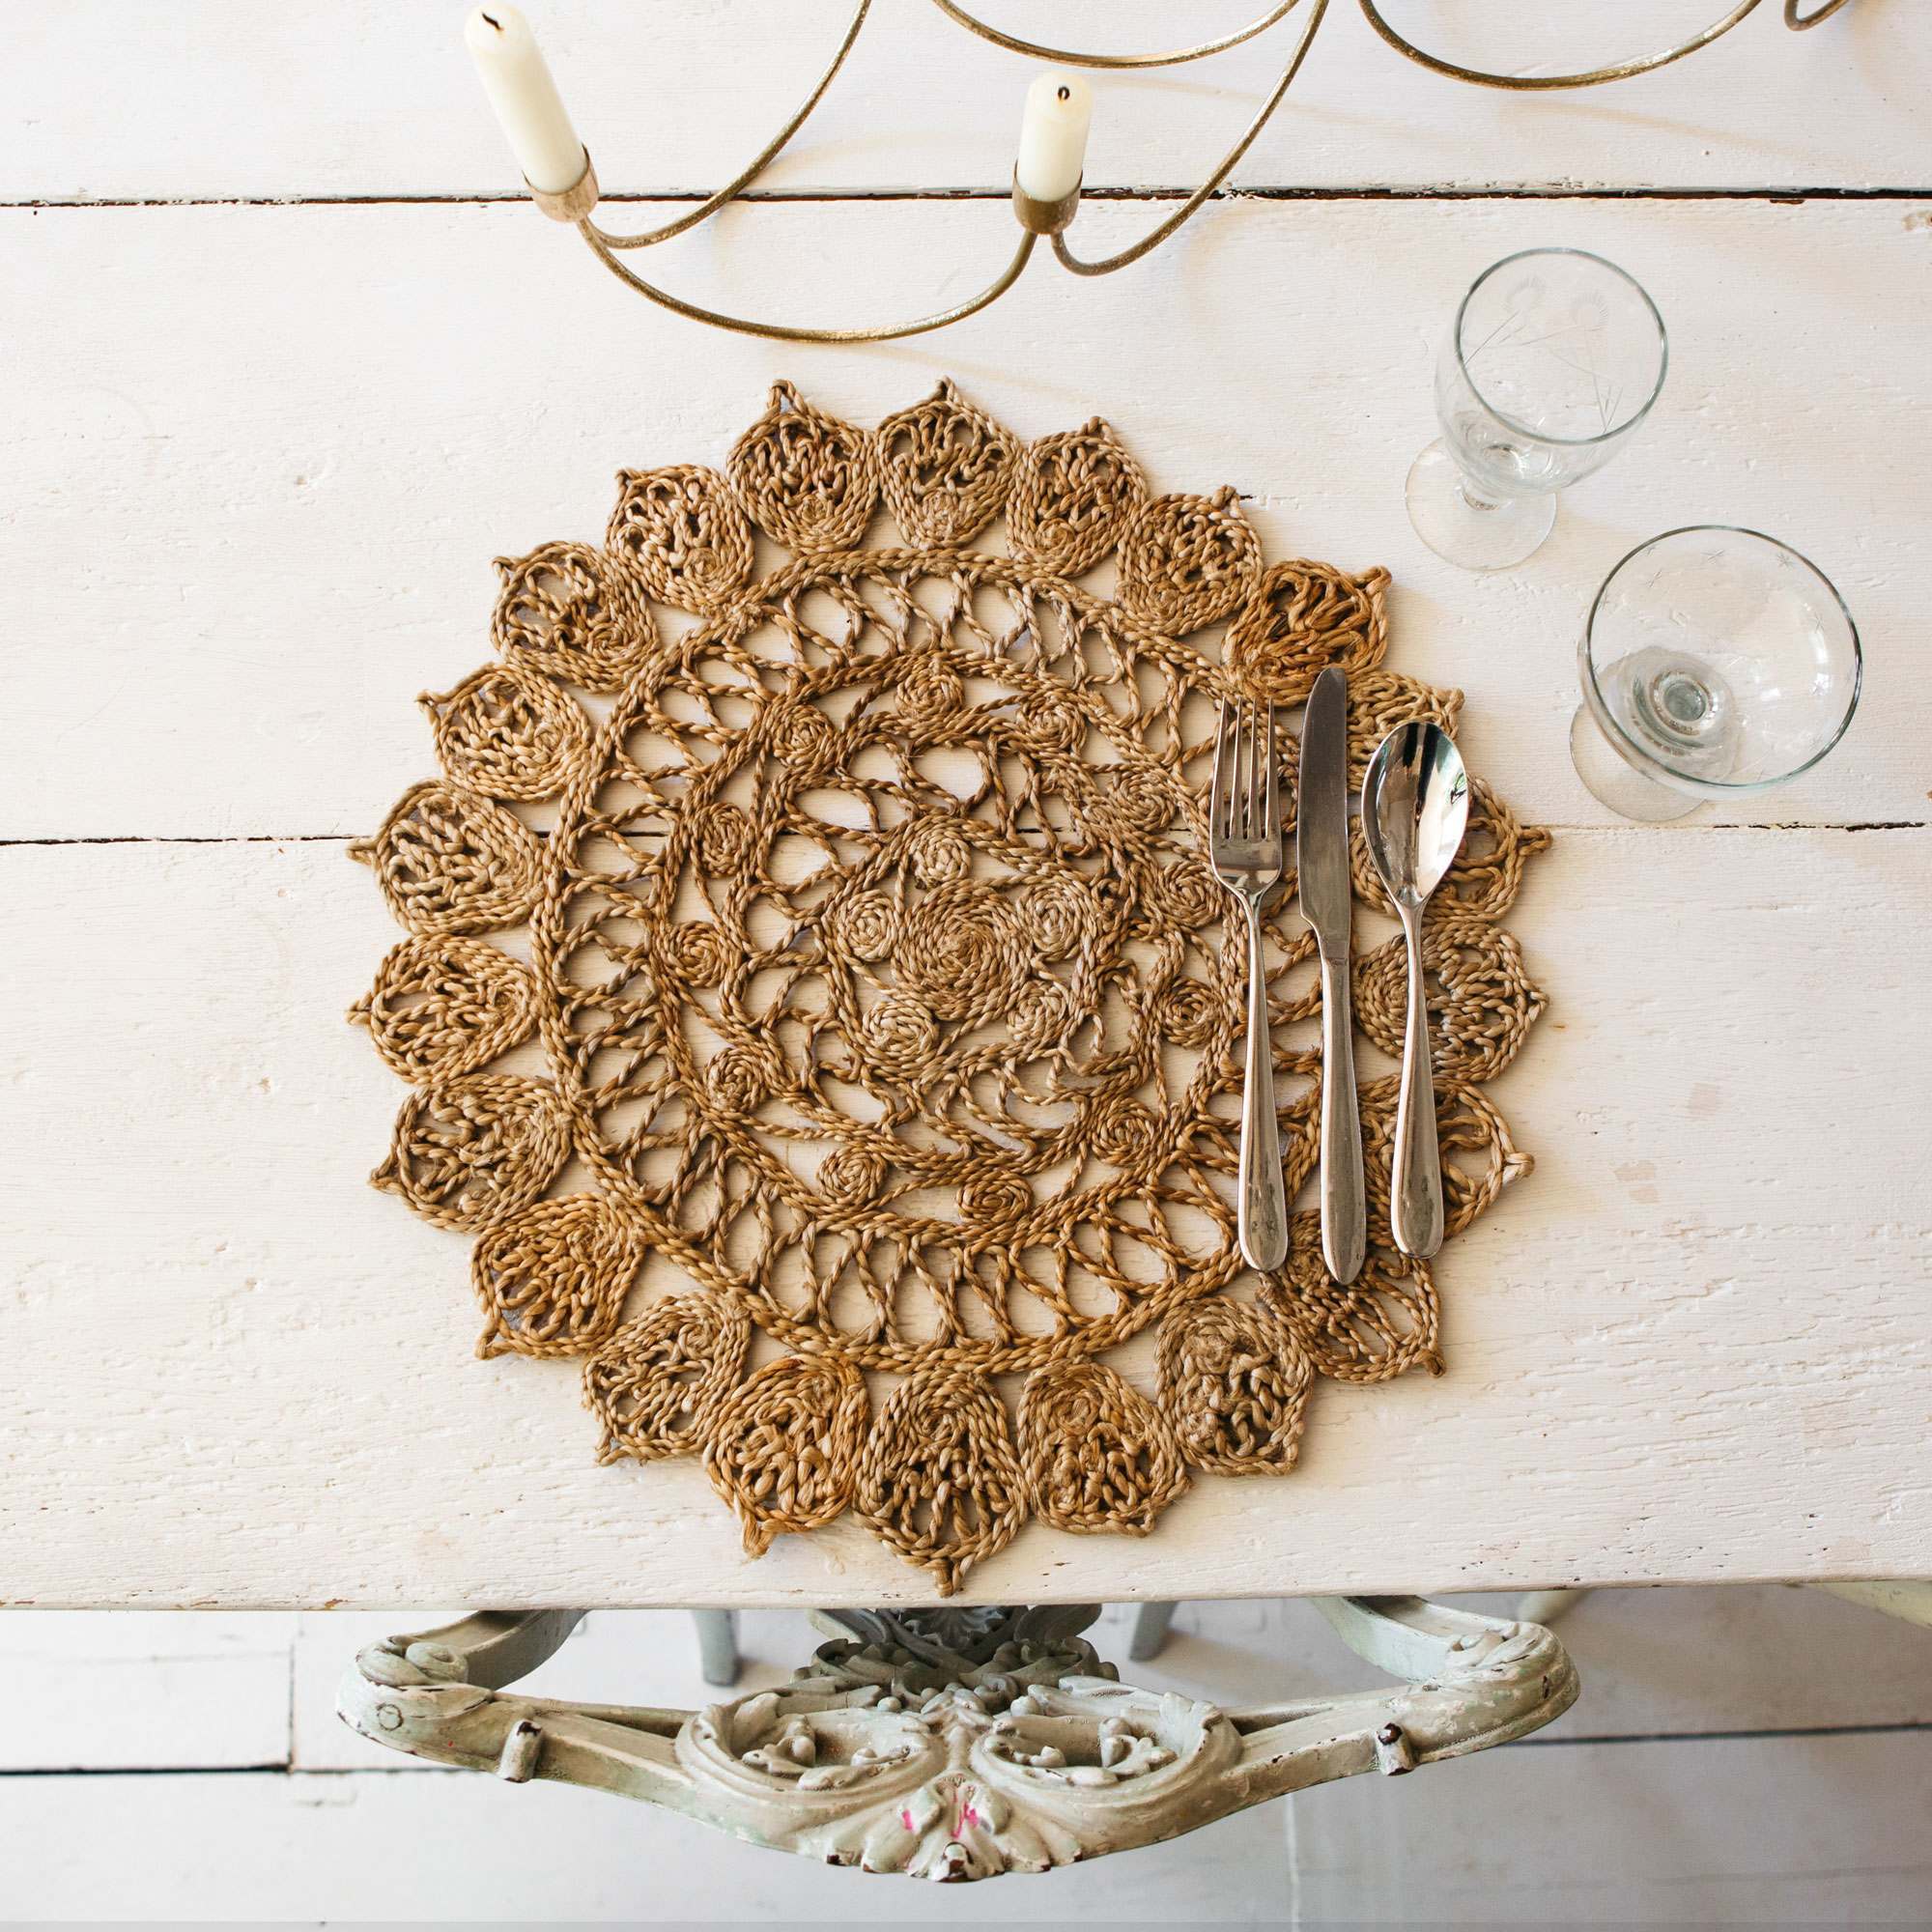 Read more about Graham and green patterned grass placemat